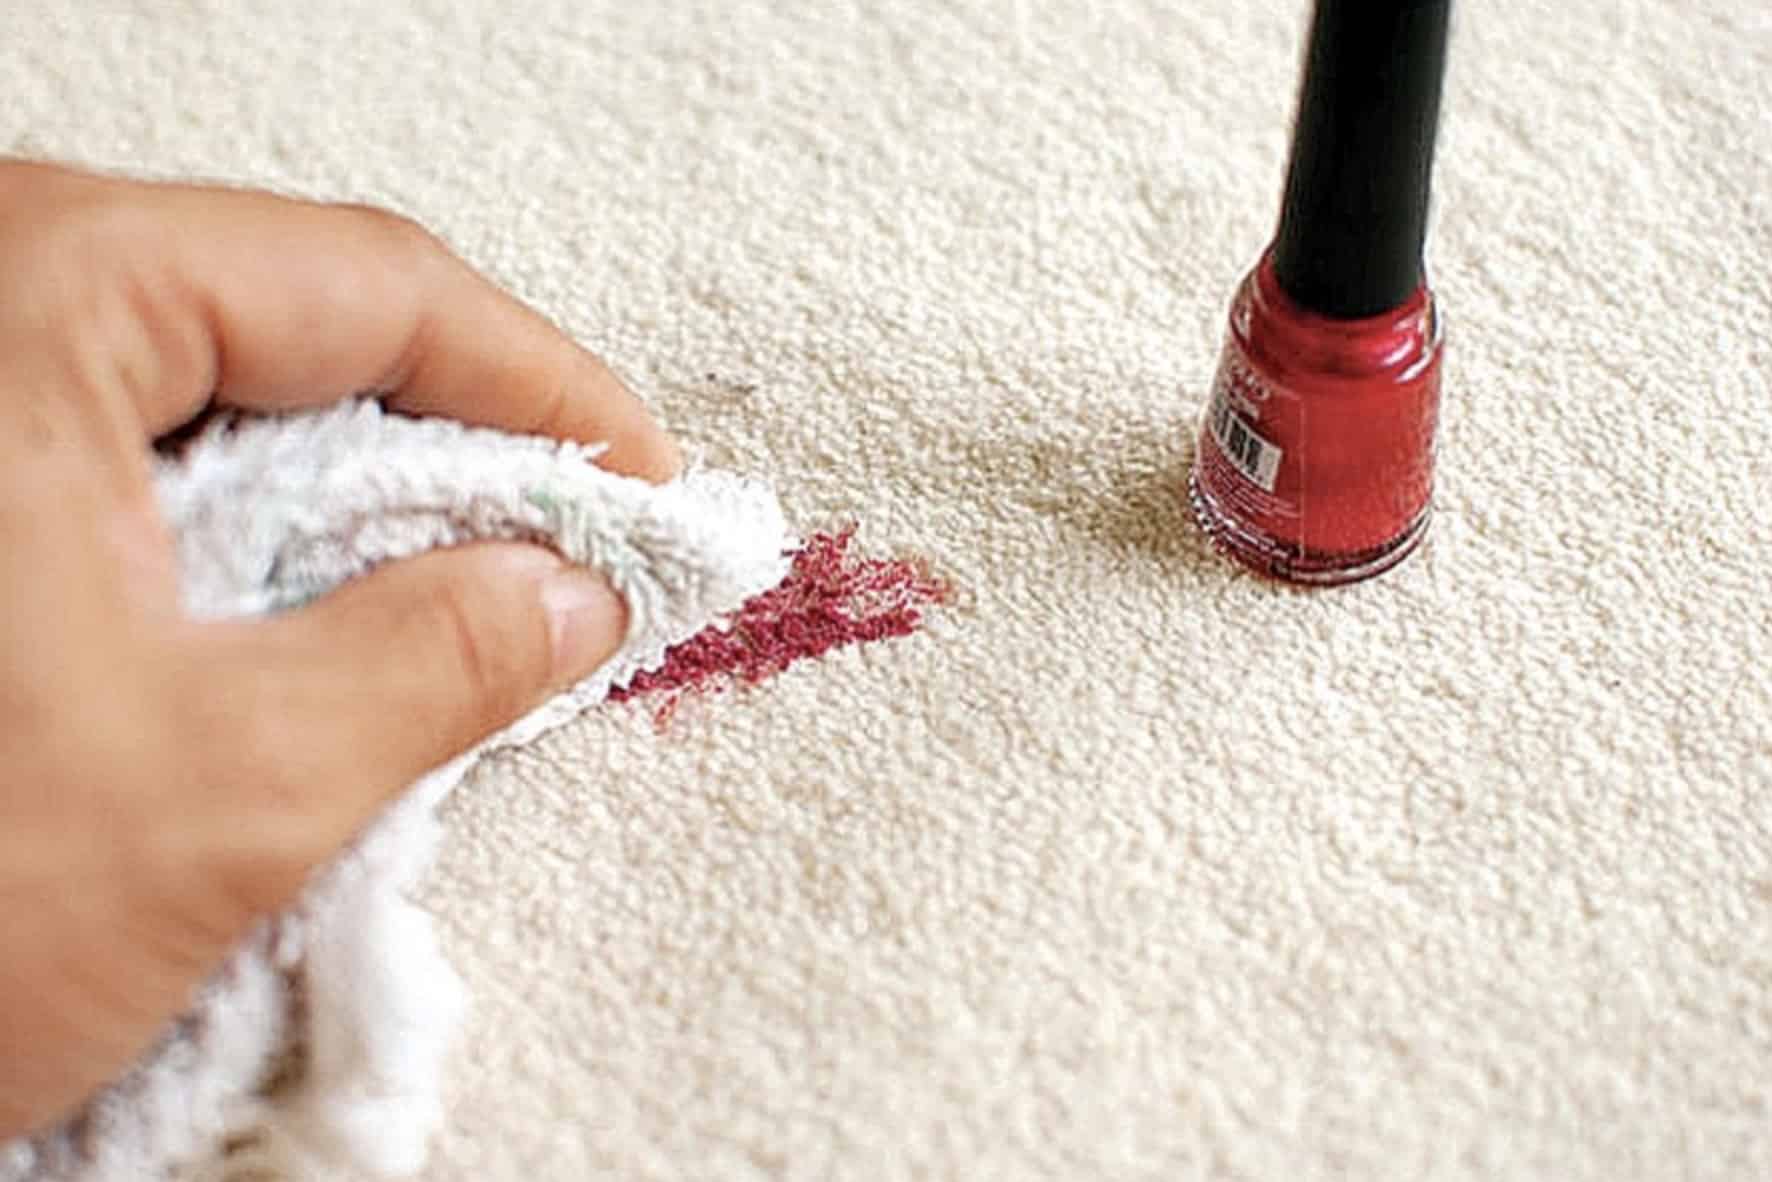 tips to remove nail polish from carpet more easily